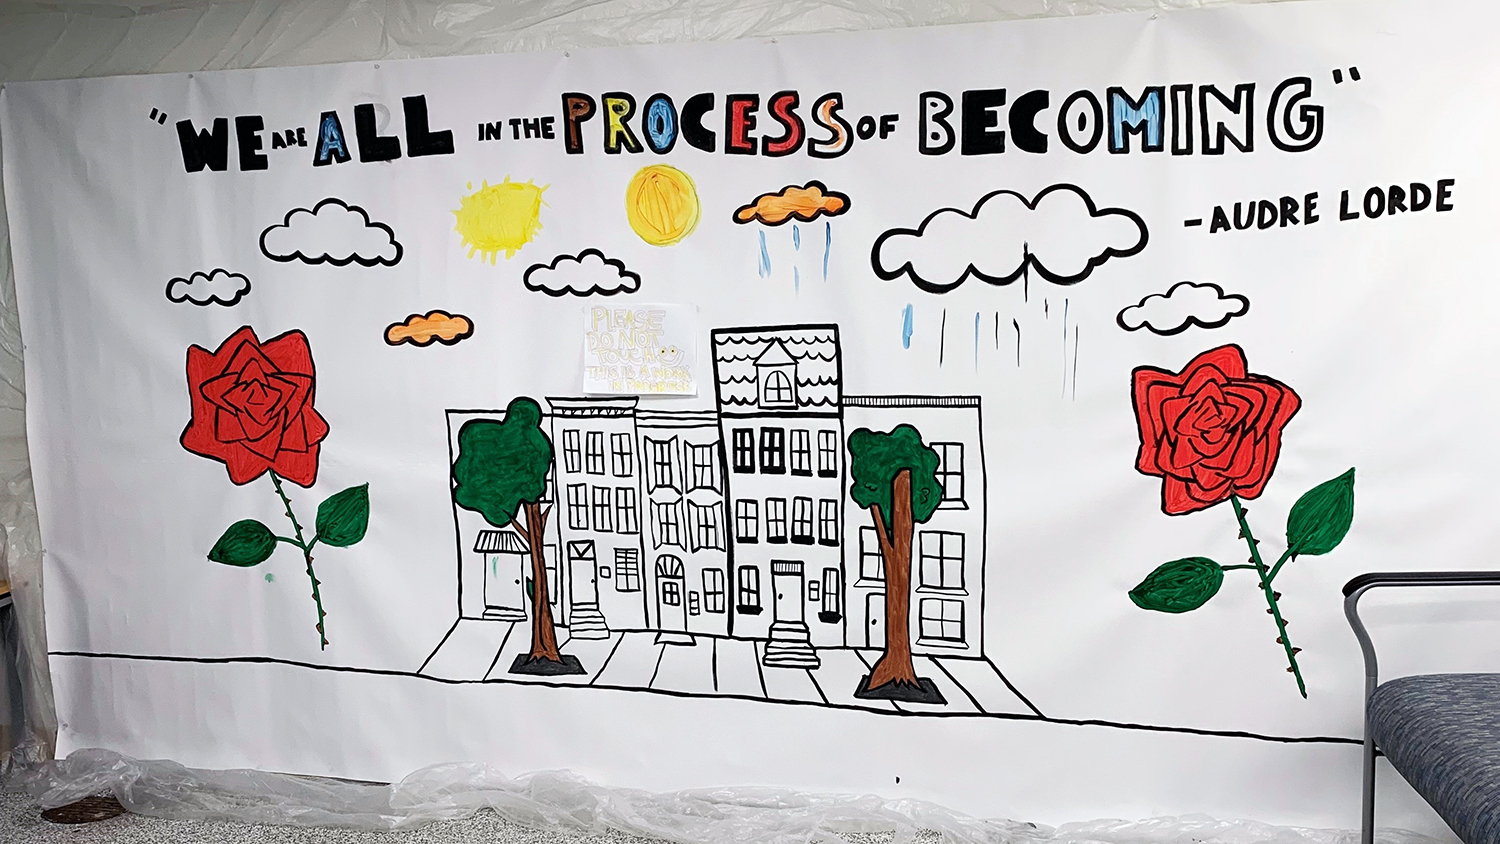 The mural is painted on a large roll of white paper and features a quote from writer Audre Lorde: “We are all in the process of becoming.” It features a black-and-white sketch of a block of row houses framed by two red roses, with clouds and the sun overhead. 